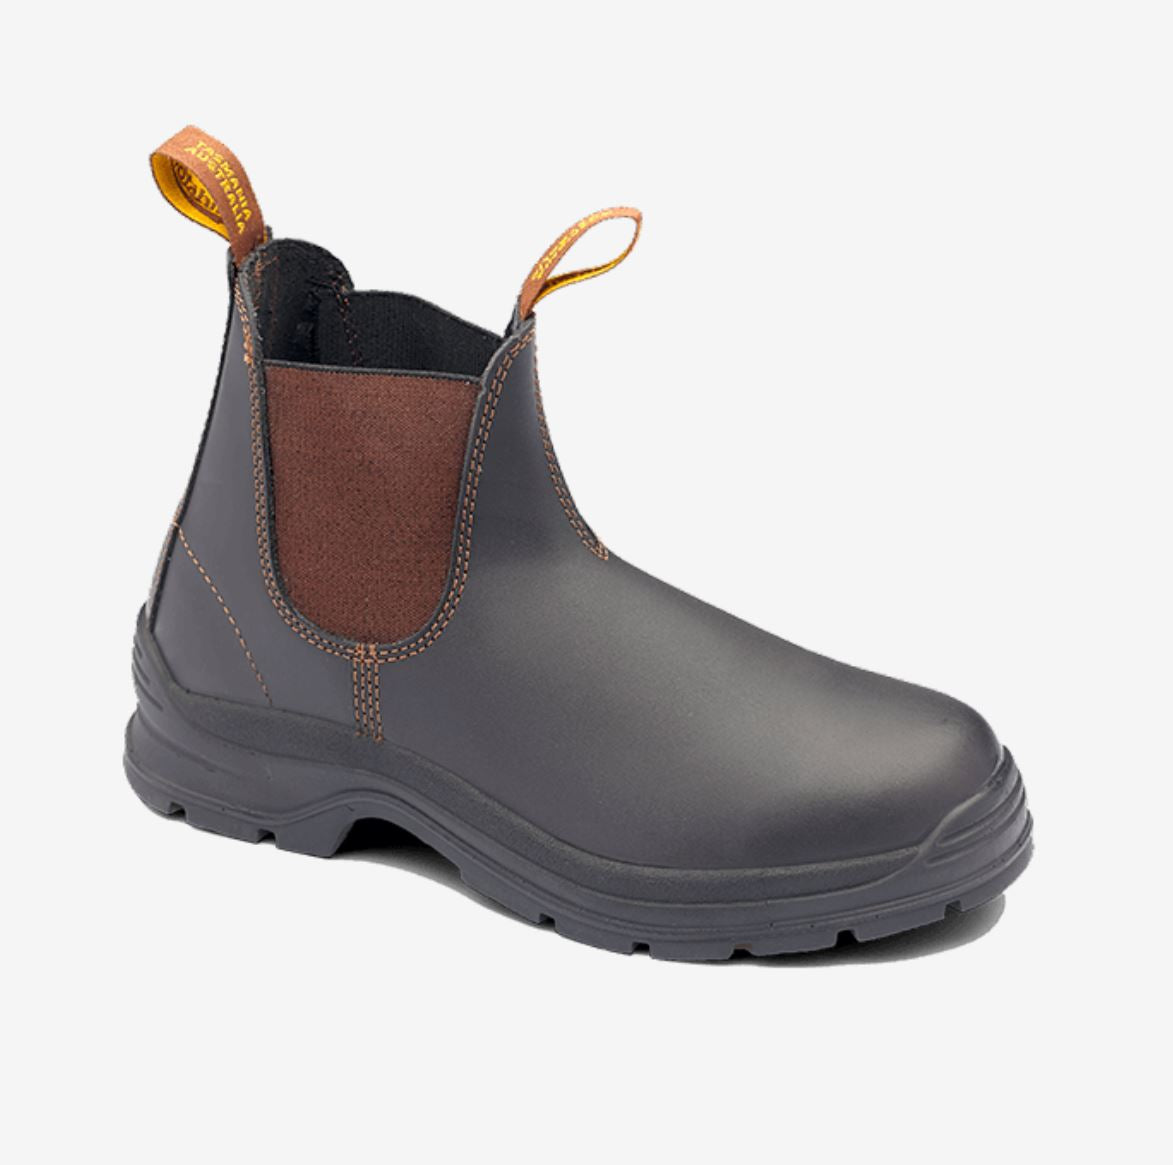 405 Blundstone Non Safety Boot Brown Waxy